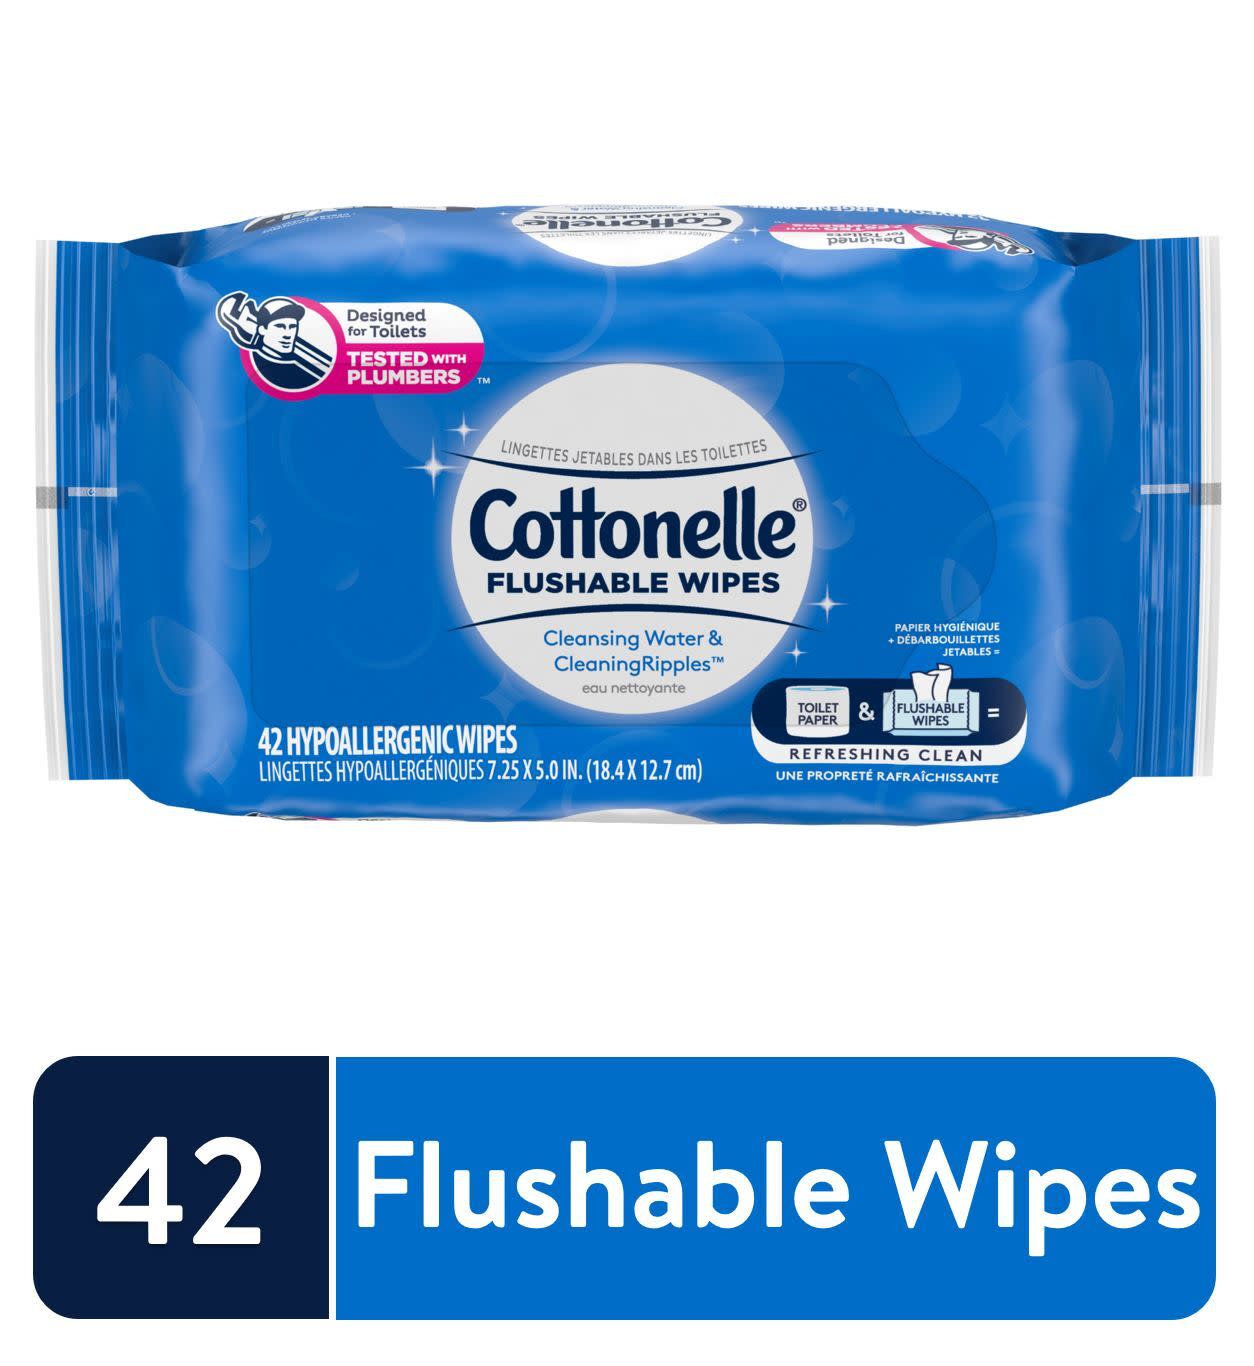 Cottonelle Flushable Wipes, 1 Resealable Pack, 42 Wipes - image 1 of 7